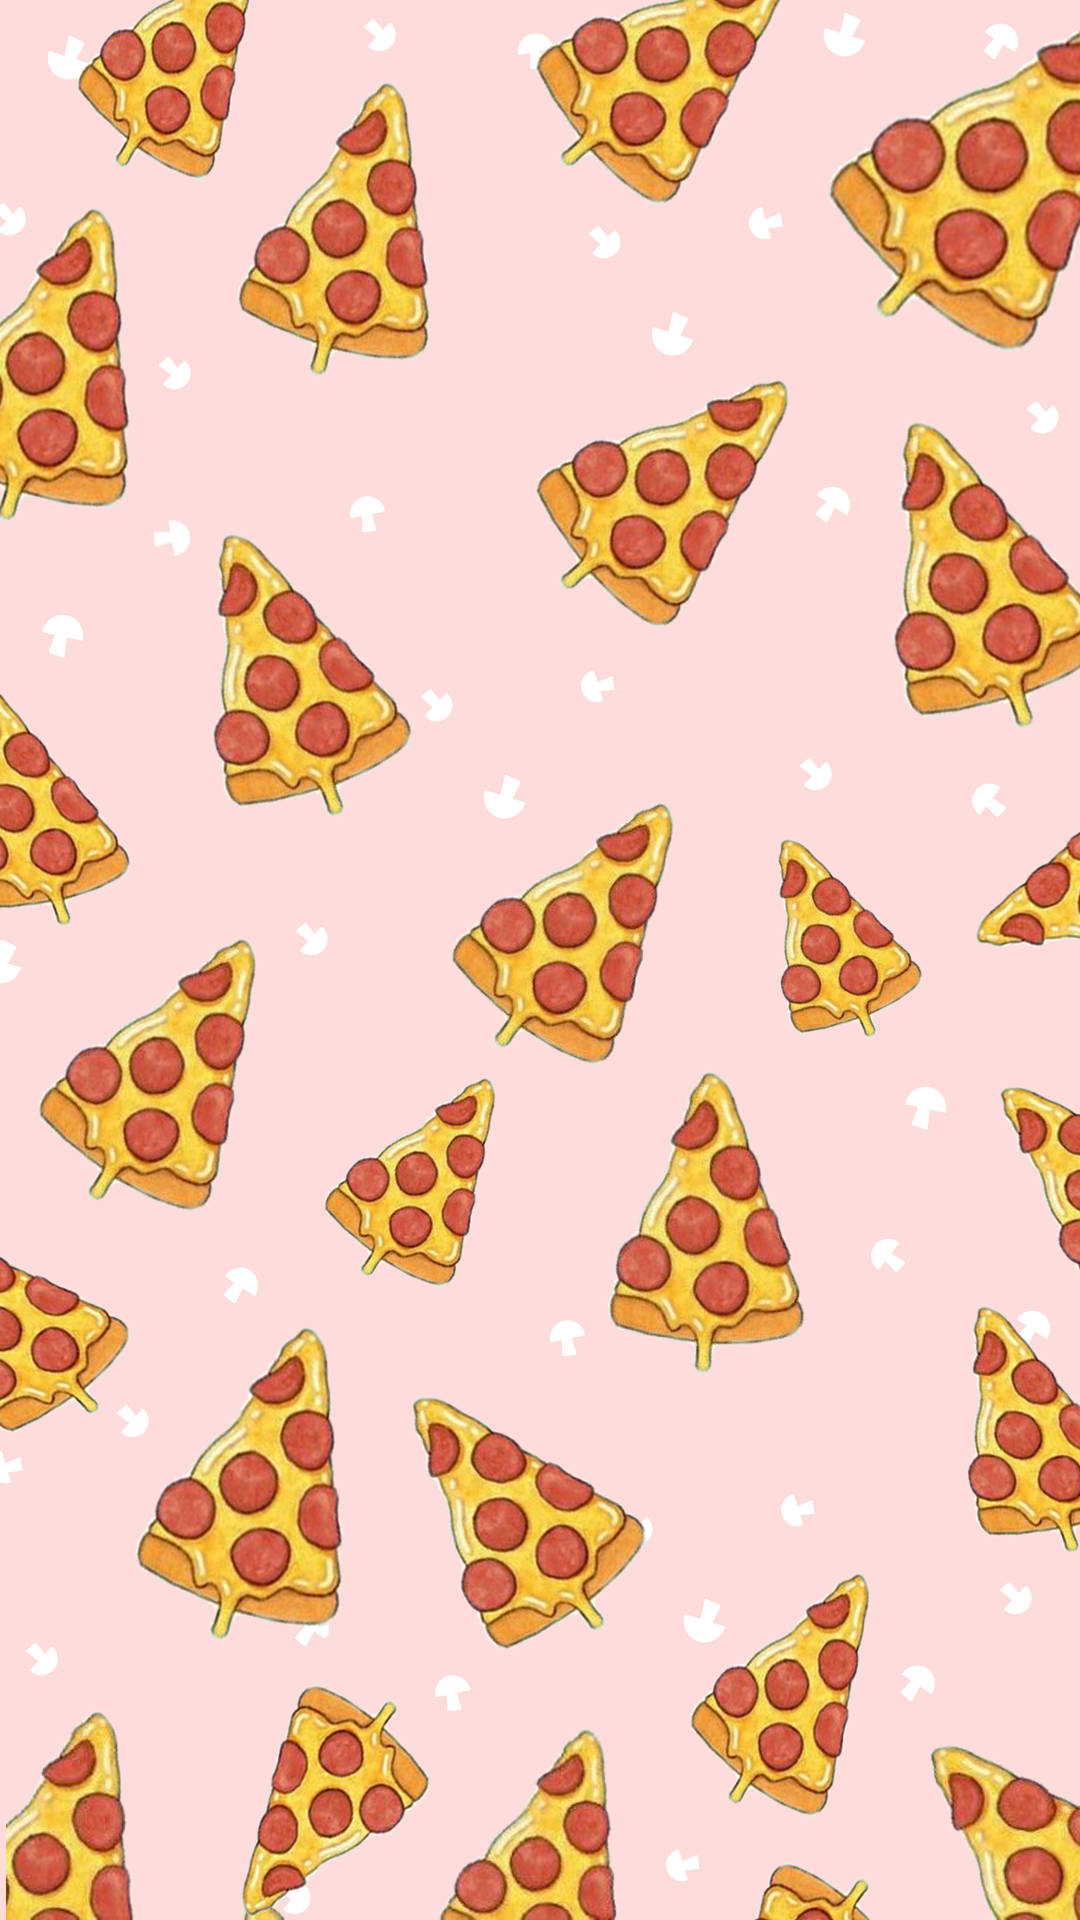 Pepperoni Pizza In Pink Wallpaper